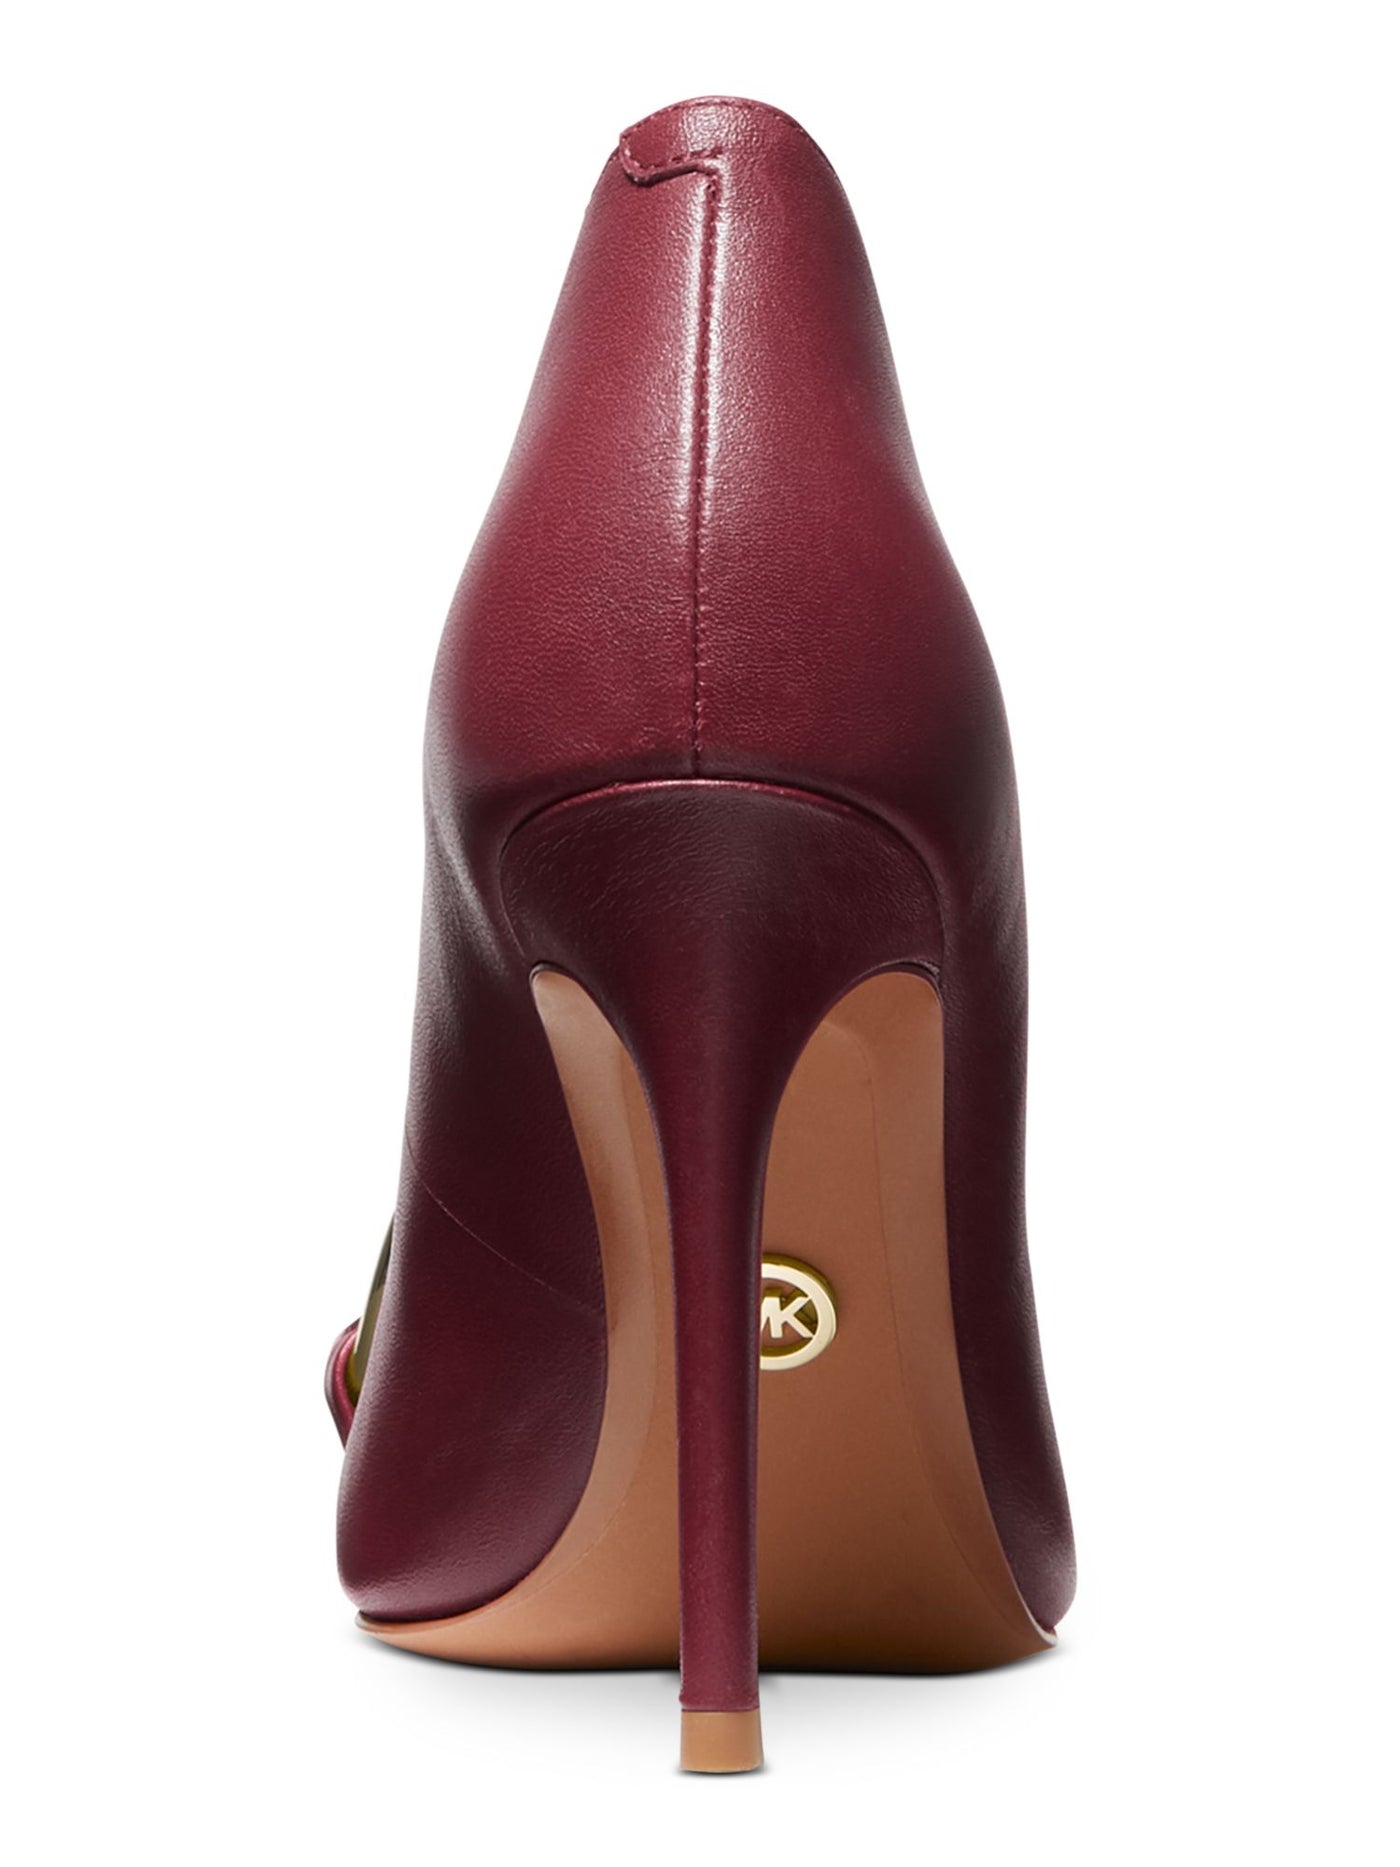 MICHAEL MICHAEL KORS Womens Burgundy Chain Accent Cushioned Scarlett Pointed Toe Stiletto Slip On Leather Dress Pumps Shoes 8 M